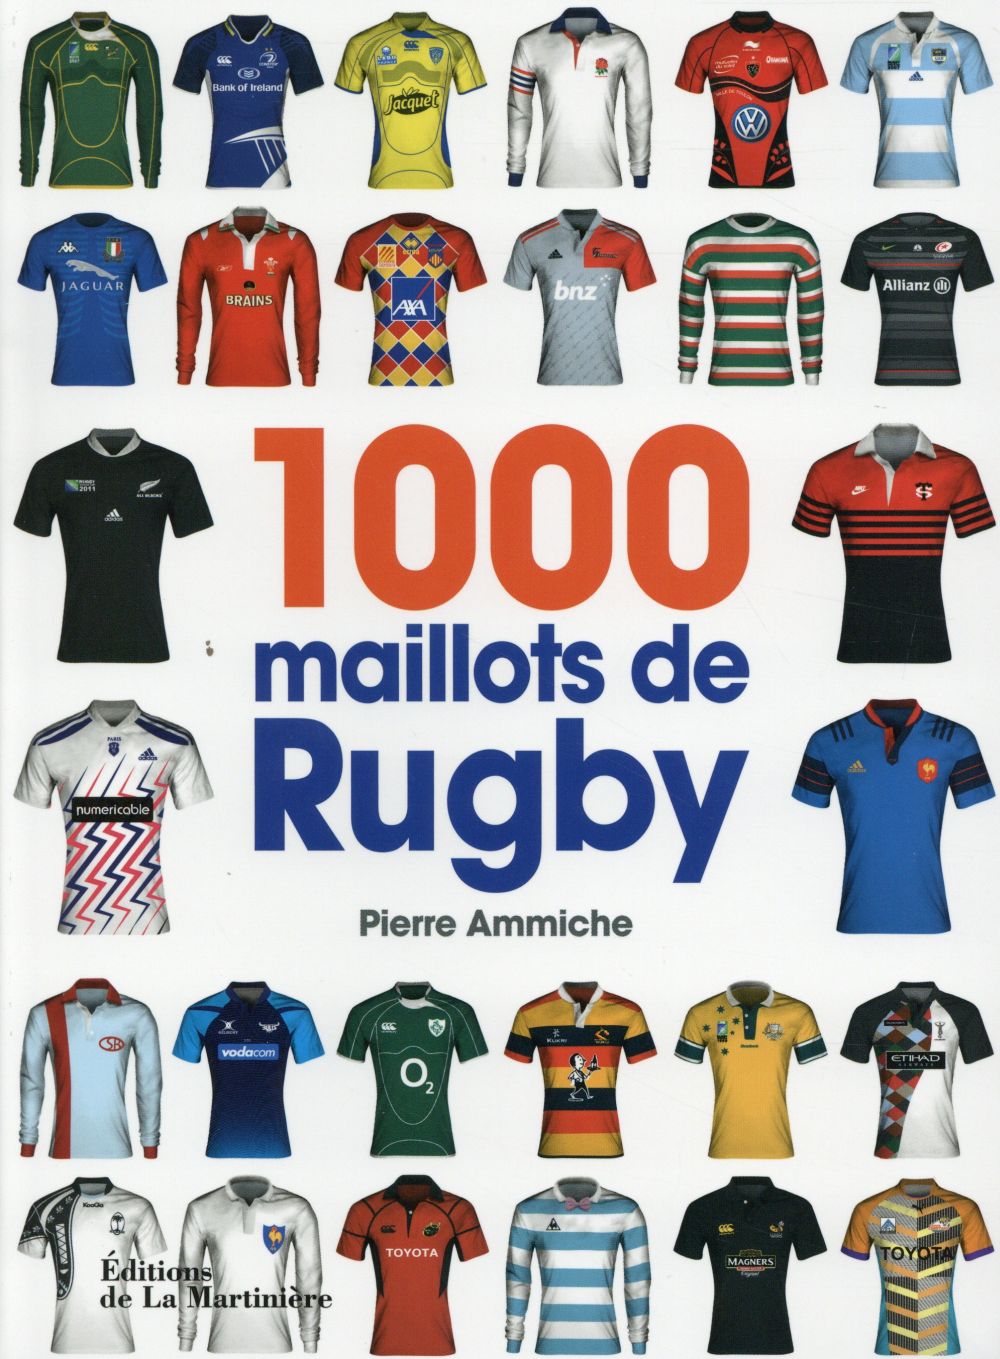 1000 maillots de rugby